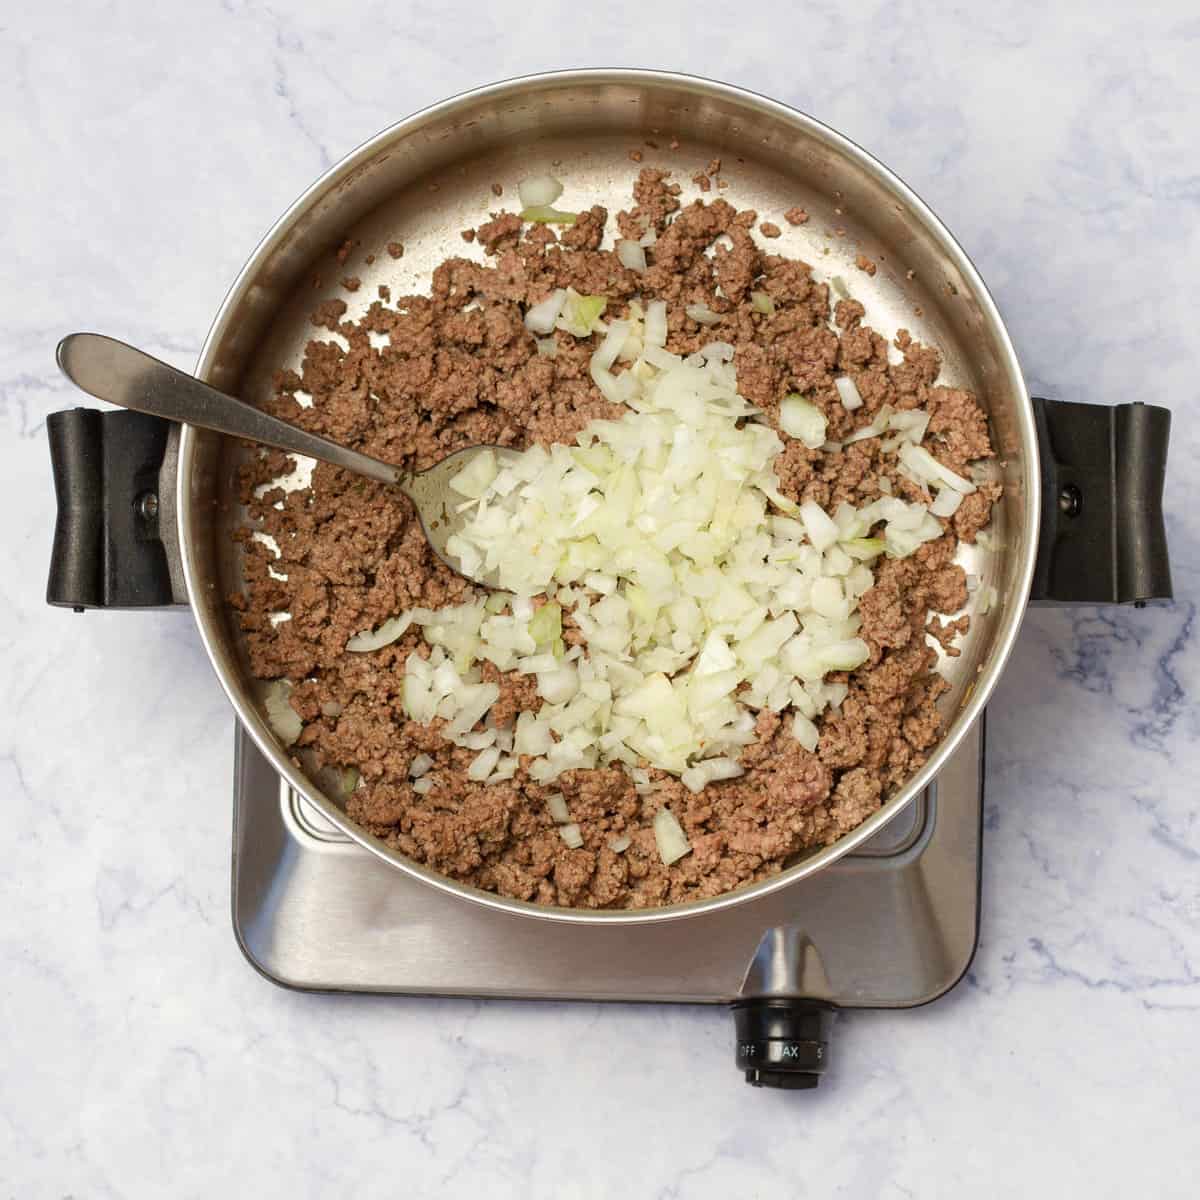 chopped onion and crushed garlic added to ground beef